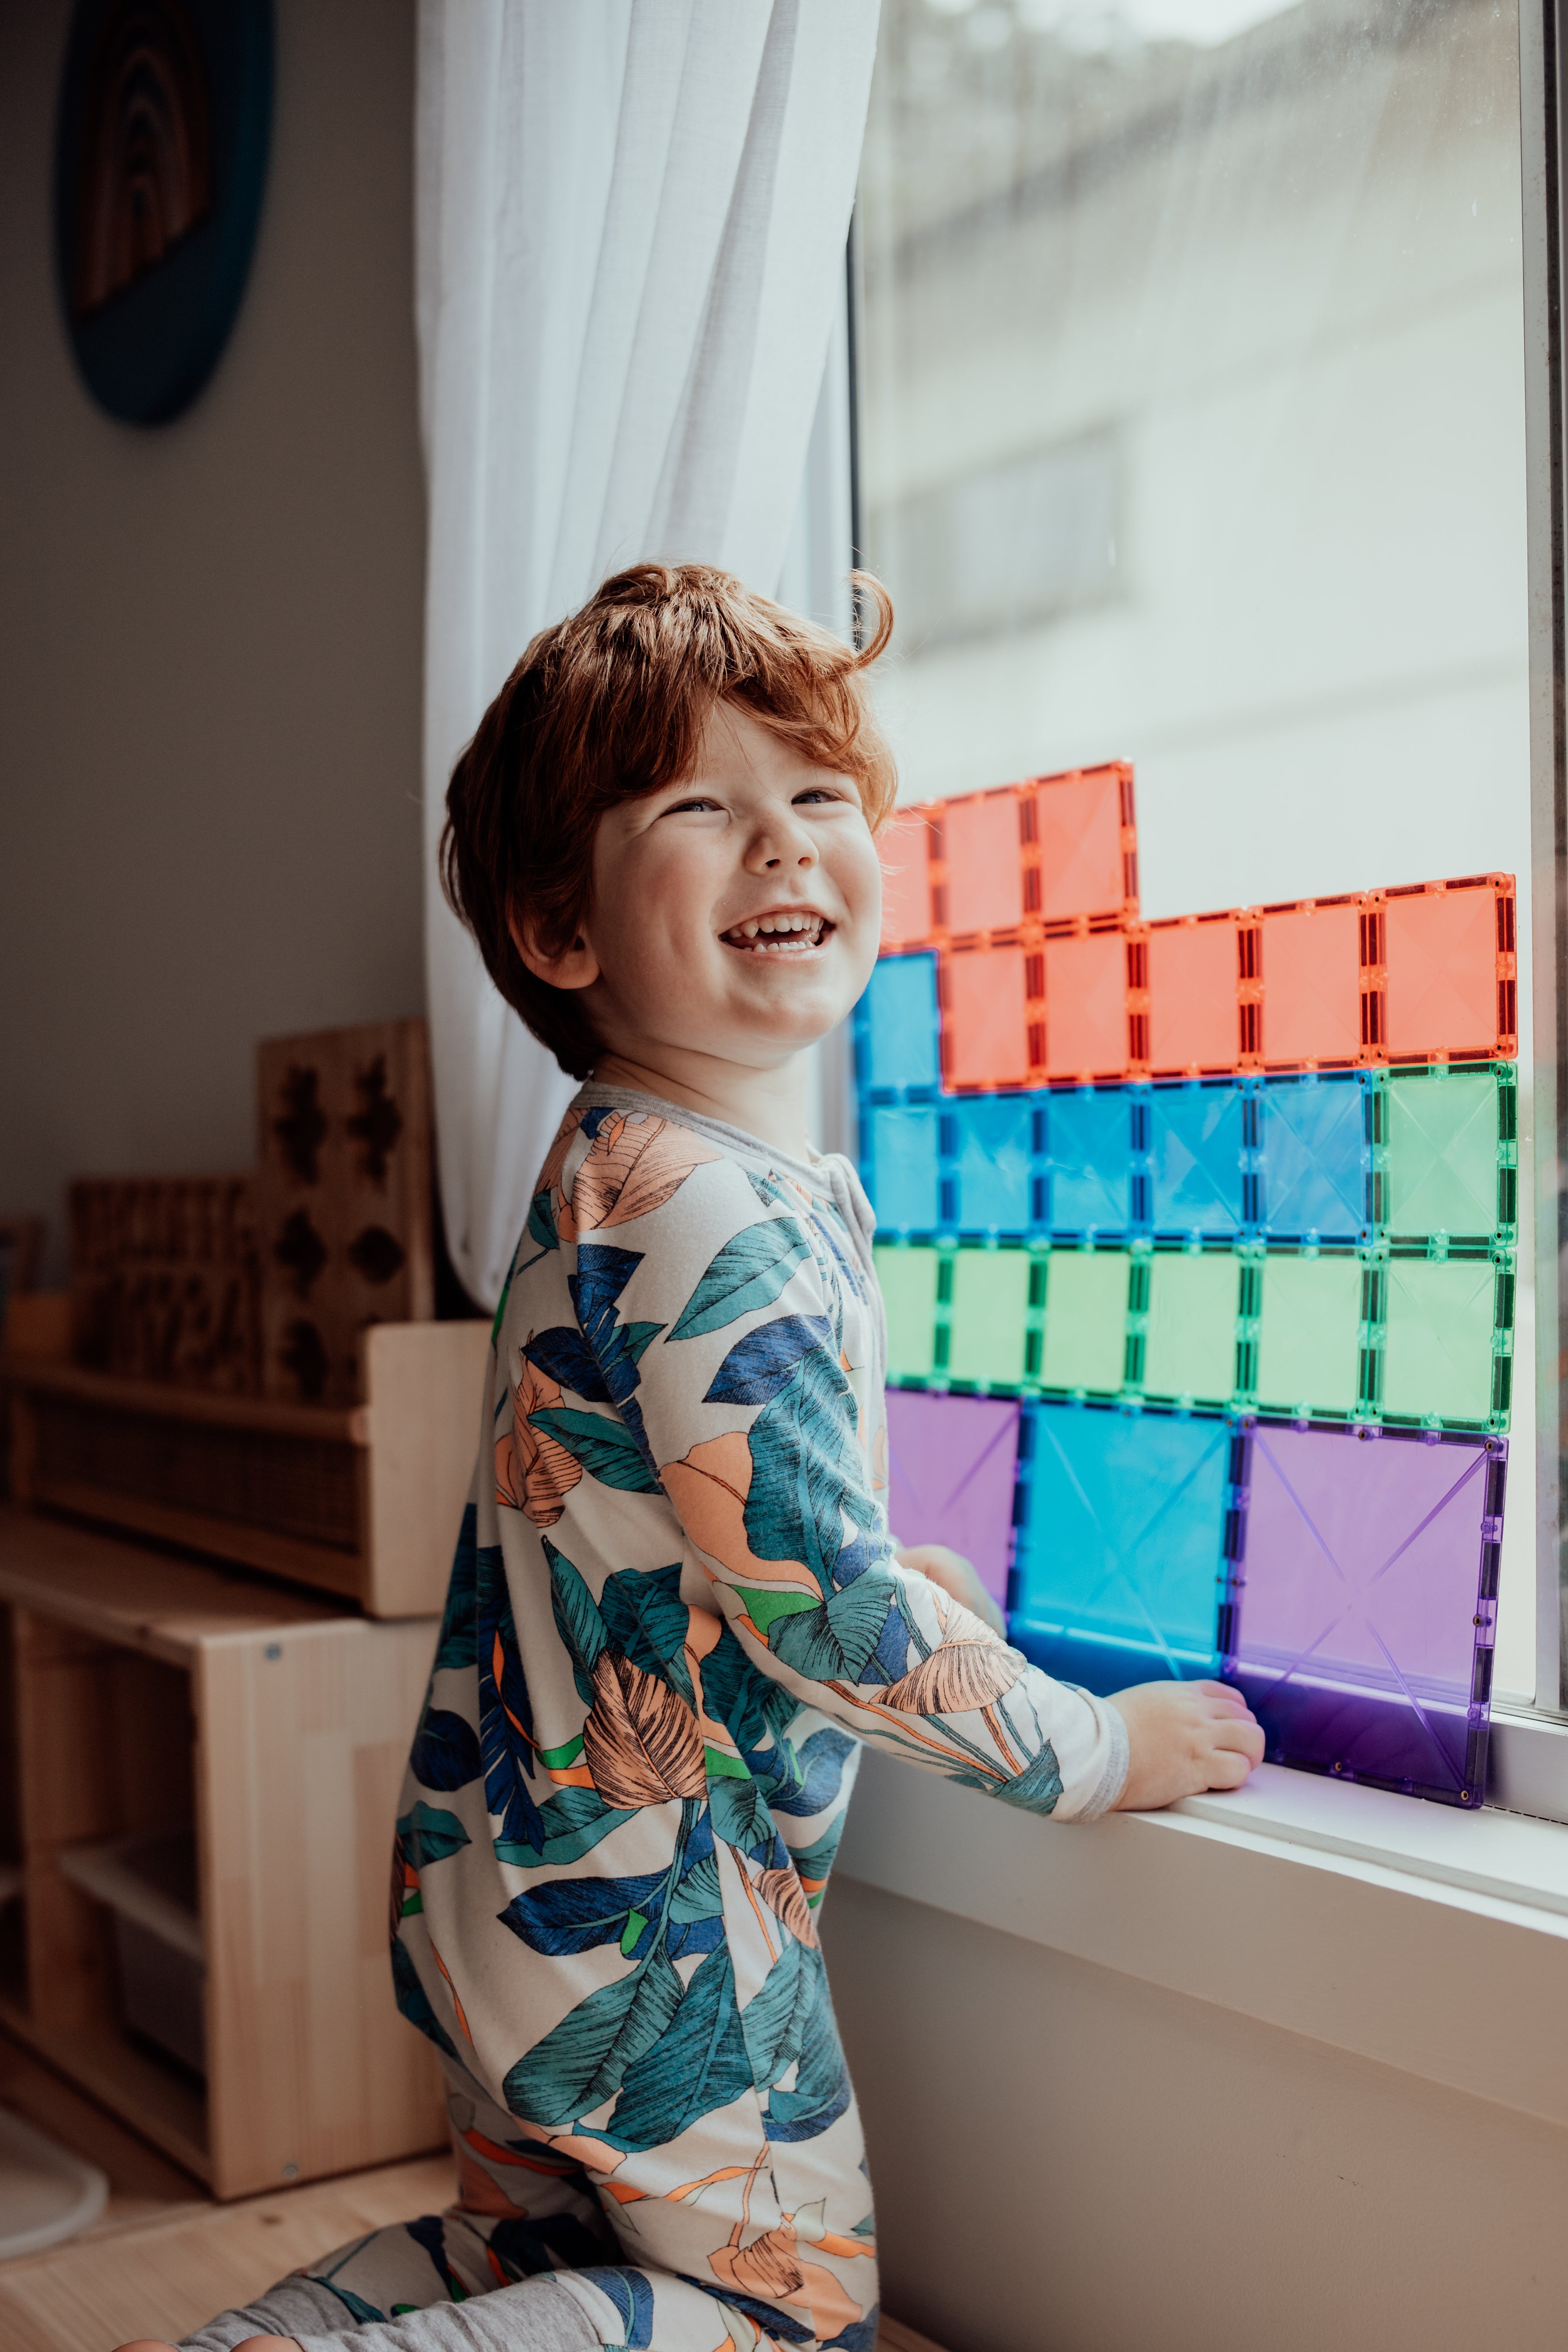 Connetix 102 Piece Rainbow Creative Magnetic Tiles Pack | Free Shipping | Children of the Wild